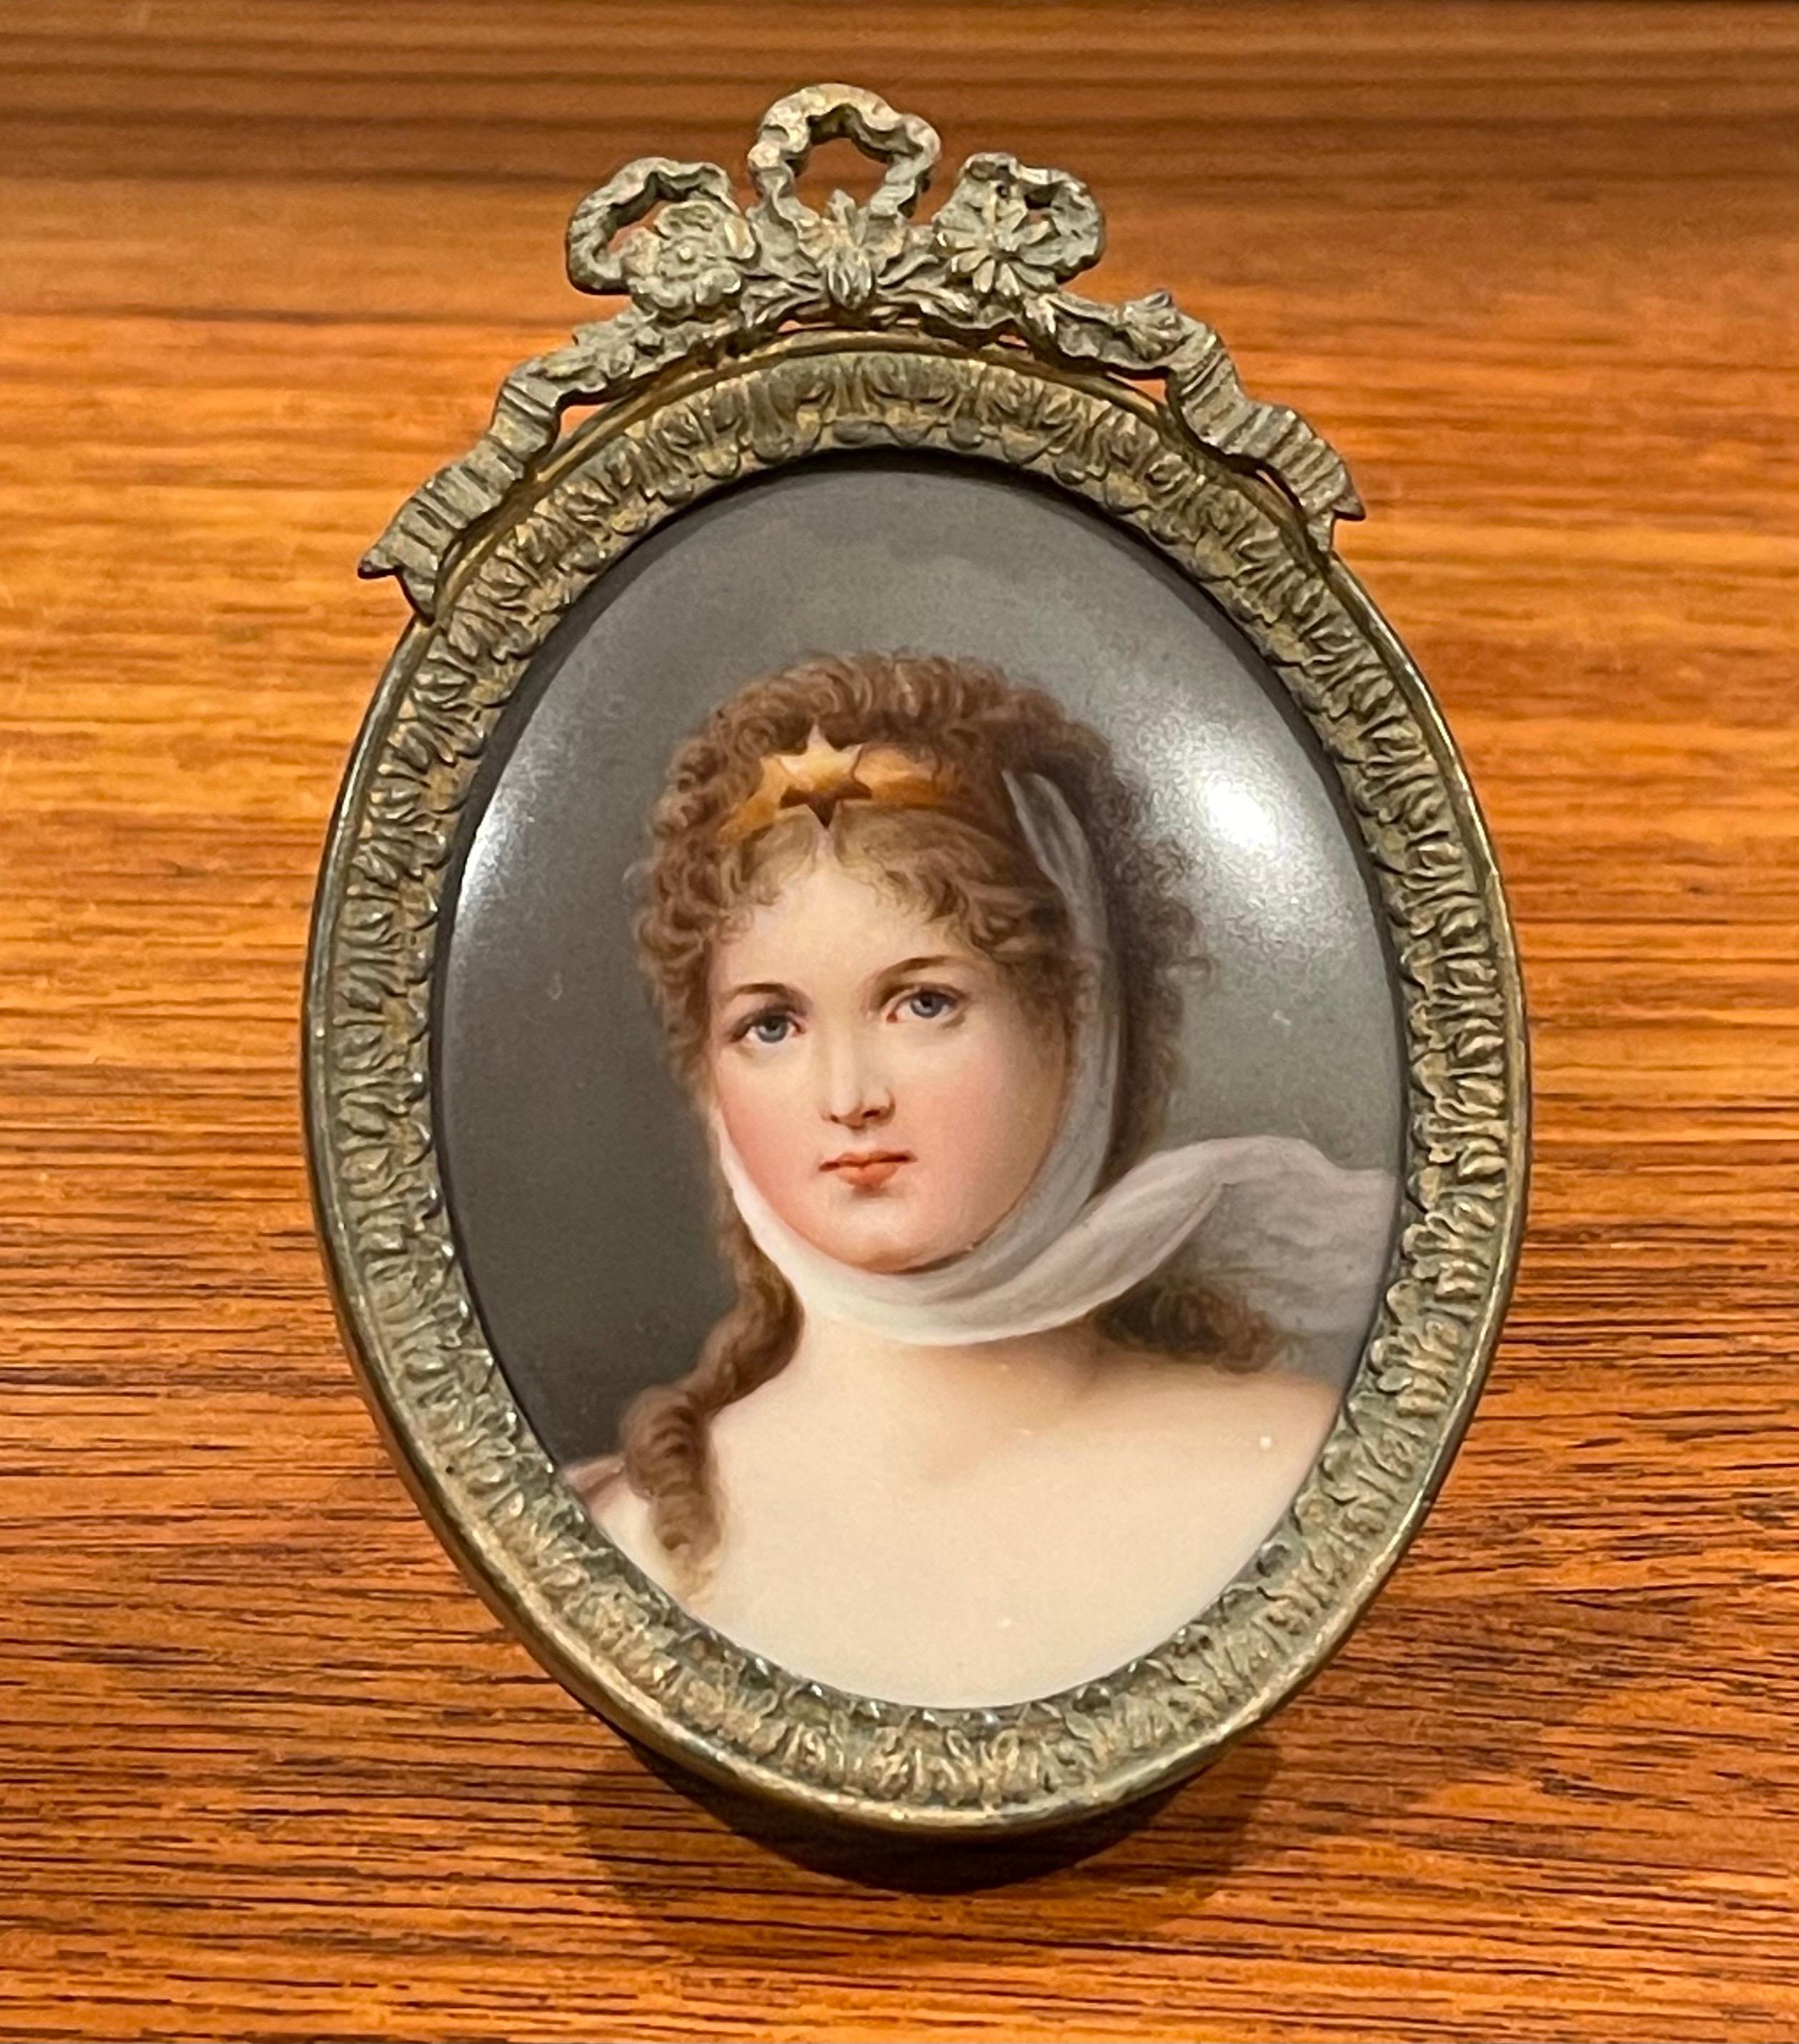 A very nice antique hand-painted miniature portrait on porcelain of Princess Louise of England, circa 1900s. The piece is mostly likely a 